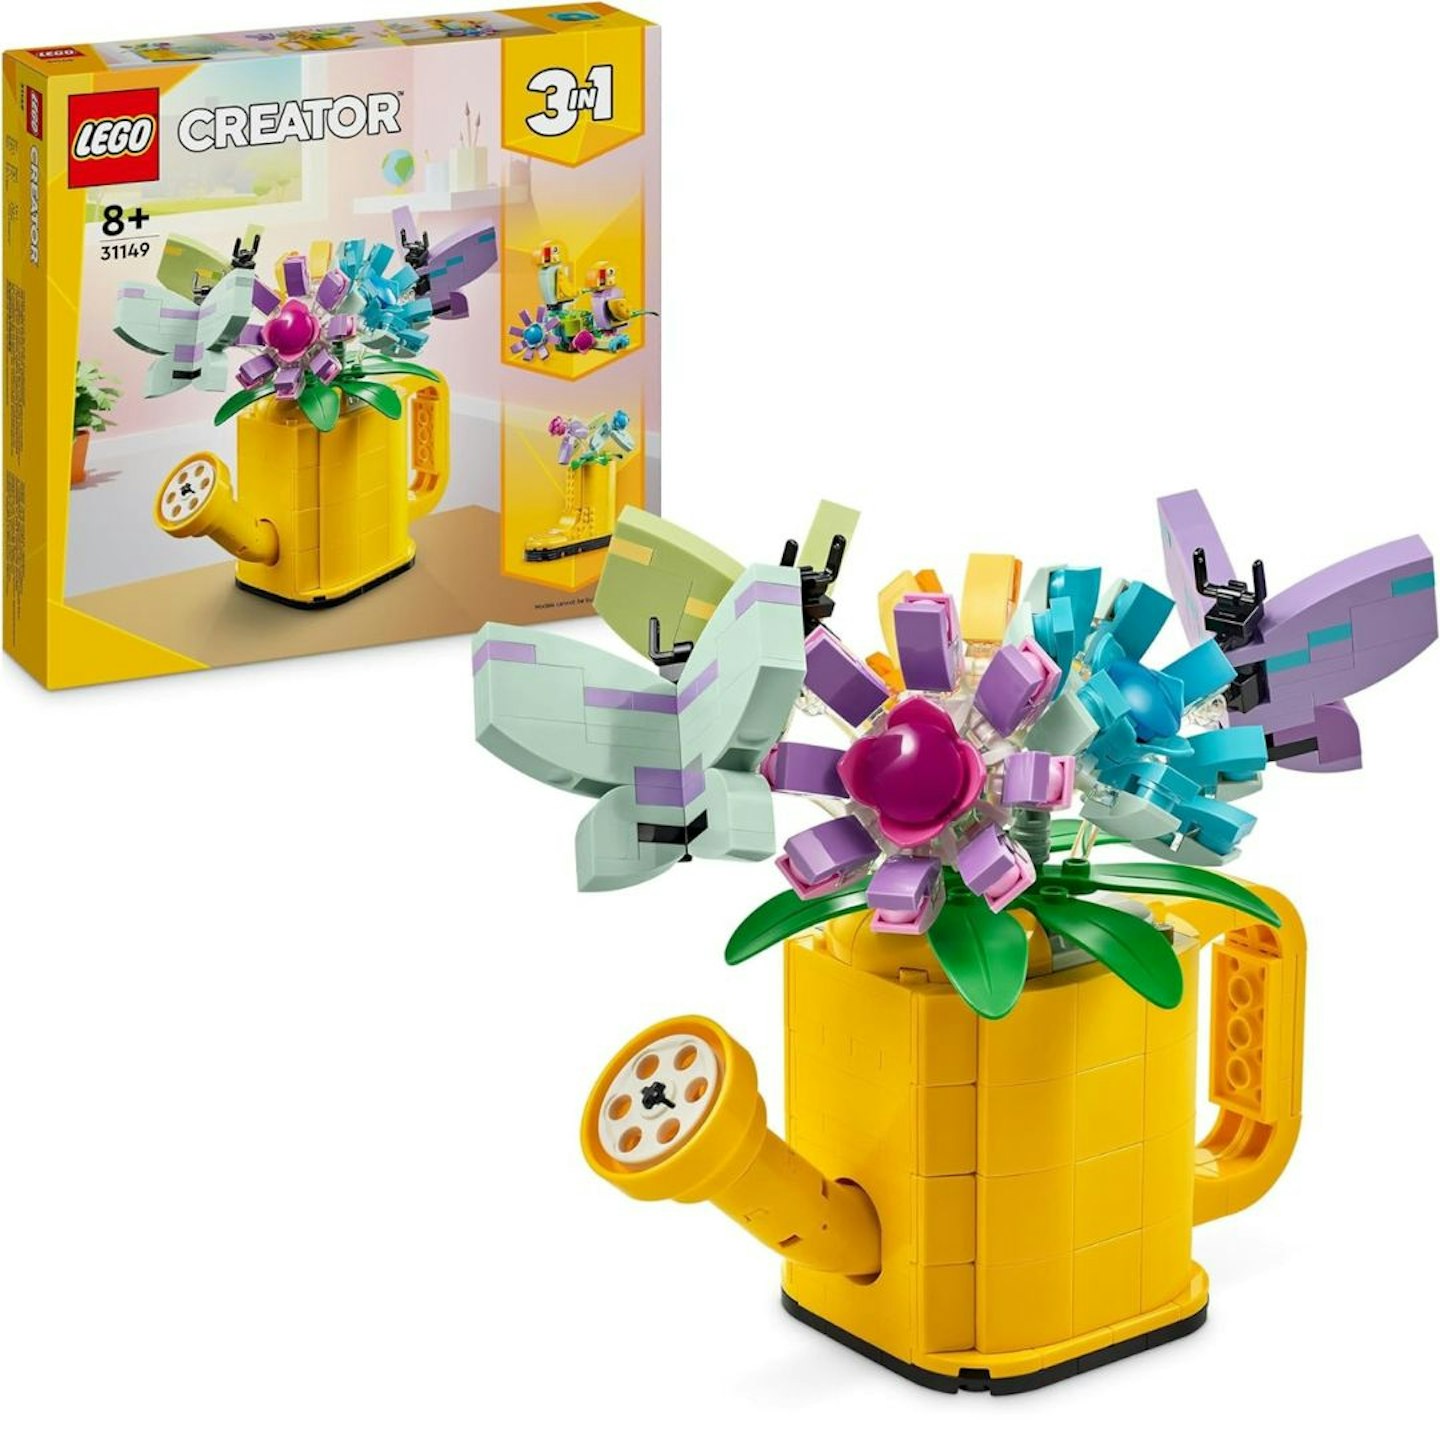 The best LEGO sets for adults: LEGO Creator 3in1 Flowers in Watering Can